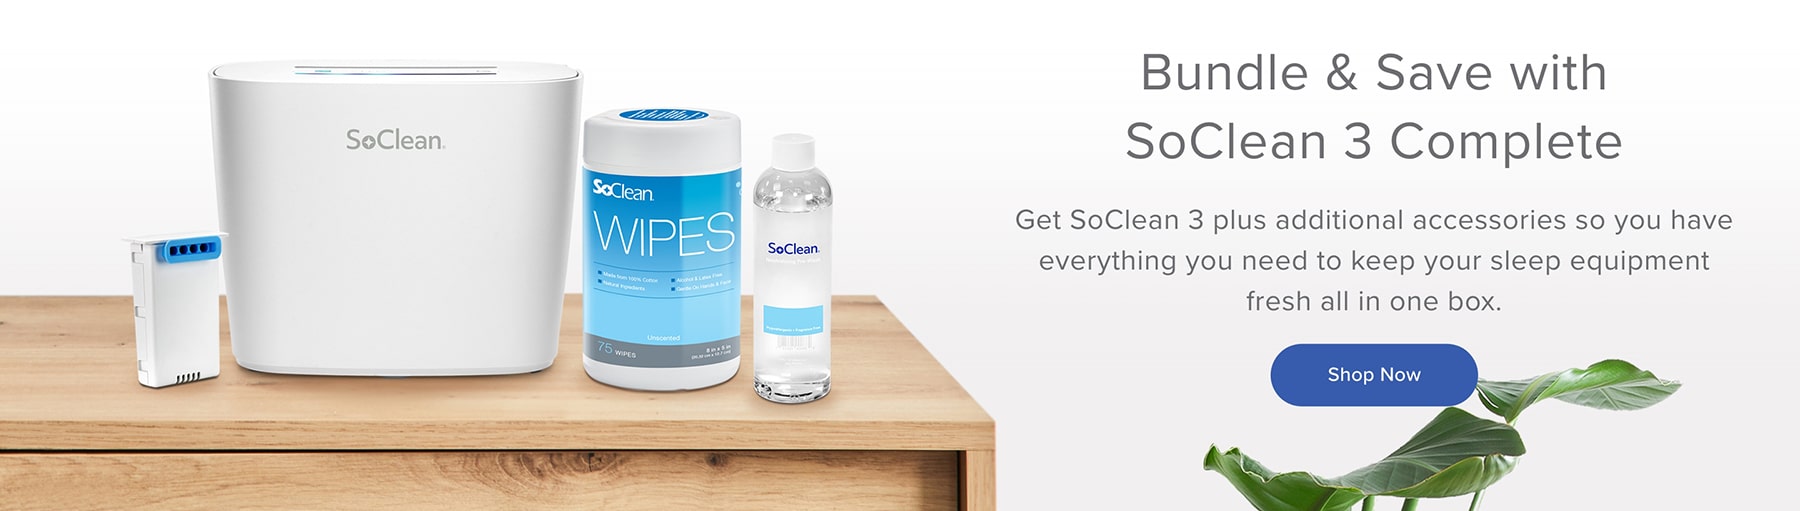 Bundle and save with SoClean 3 Complete.